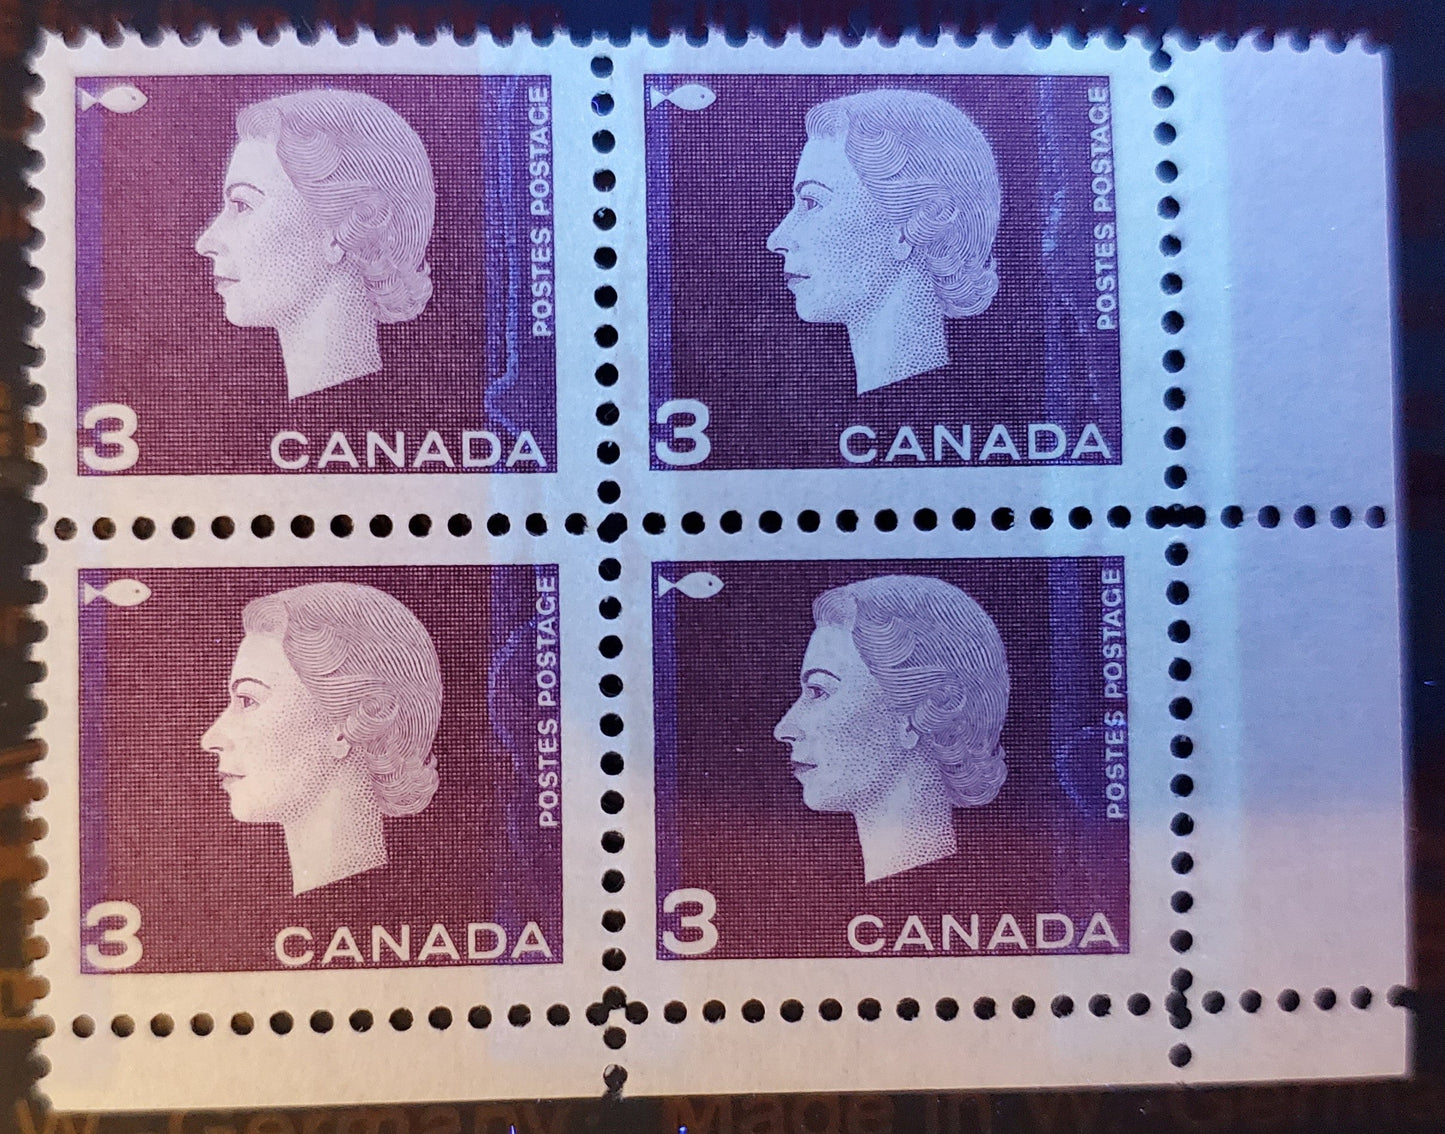 Lot 97 Canada #403iv 3c Light Plum Fishing Industry, 1962-1963 Cameo Issue, A VFNH LR Winnipeg Tagged Field Stock Block Of 4 On Fluorescent Paper With Smooth Dex, Light Bluish Tagging Under Shortwave UV.